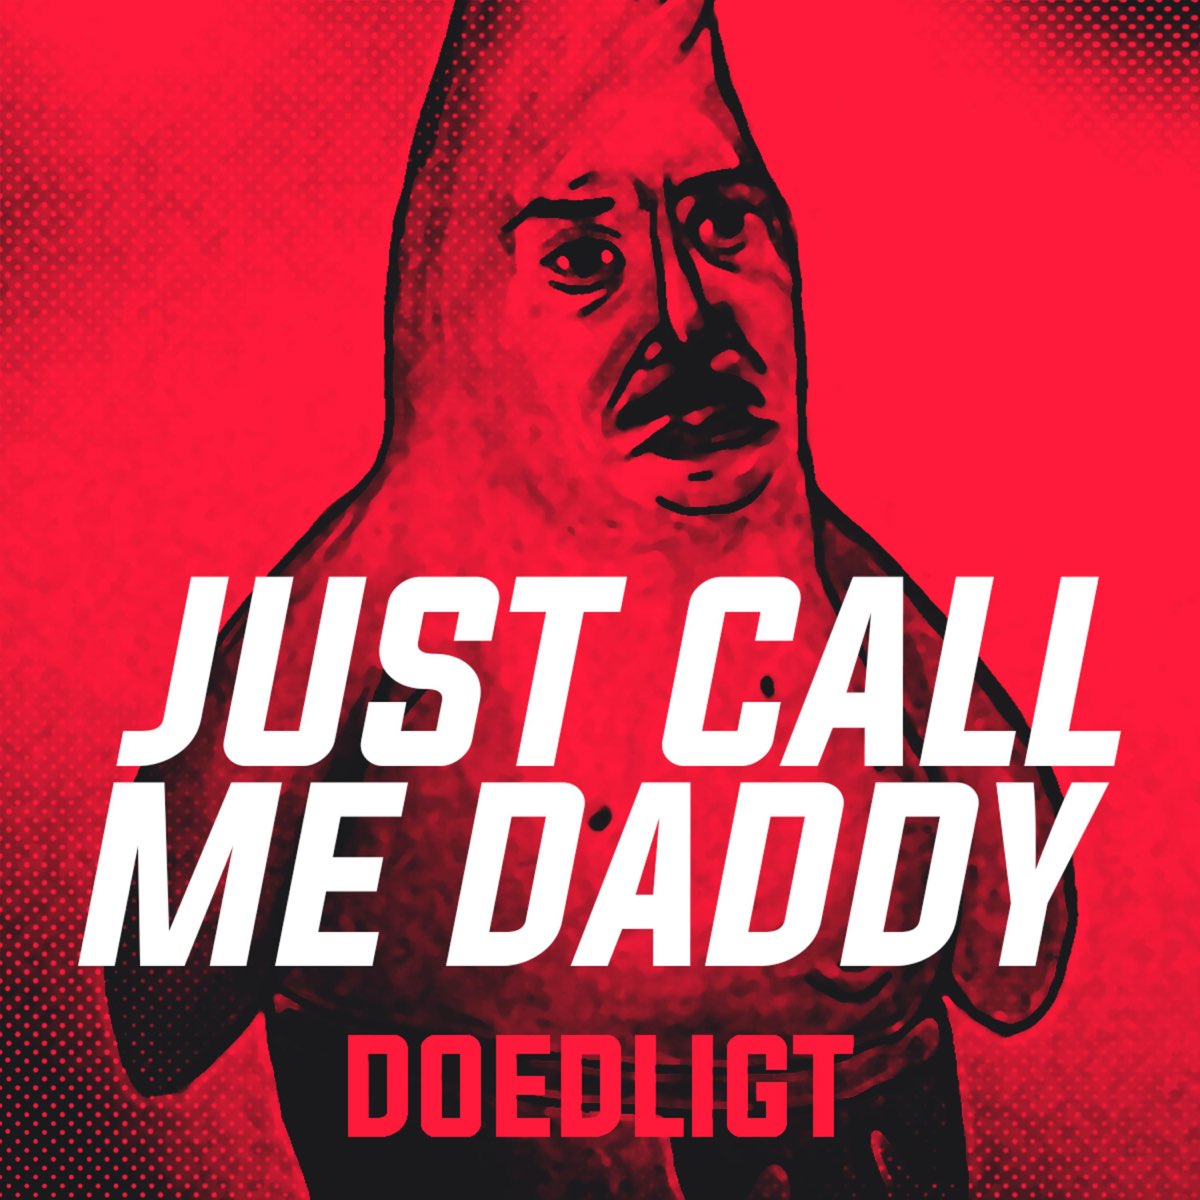 Call me Daddy. Just Call me. Just Call. Офые сфдд ьу.